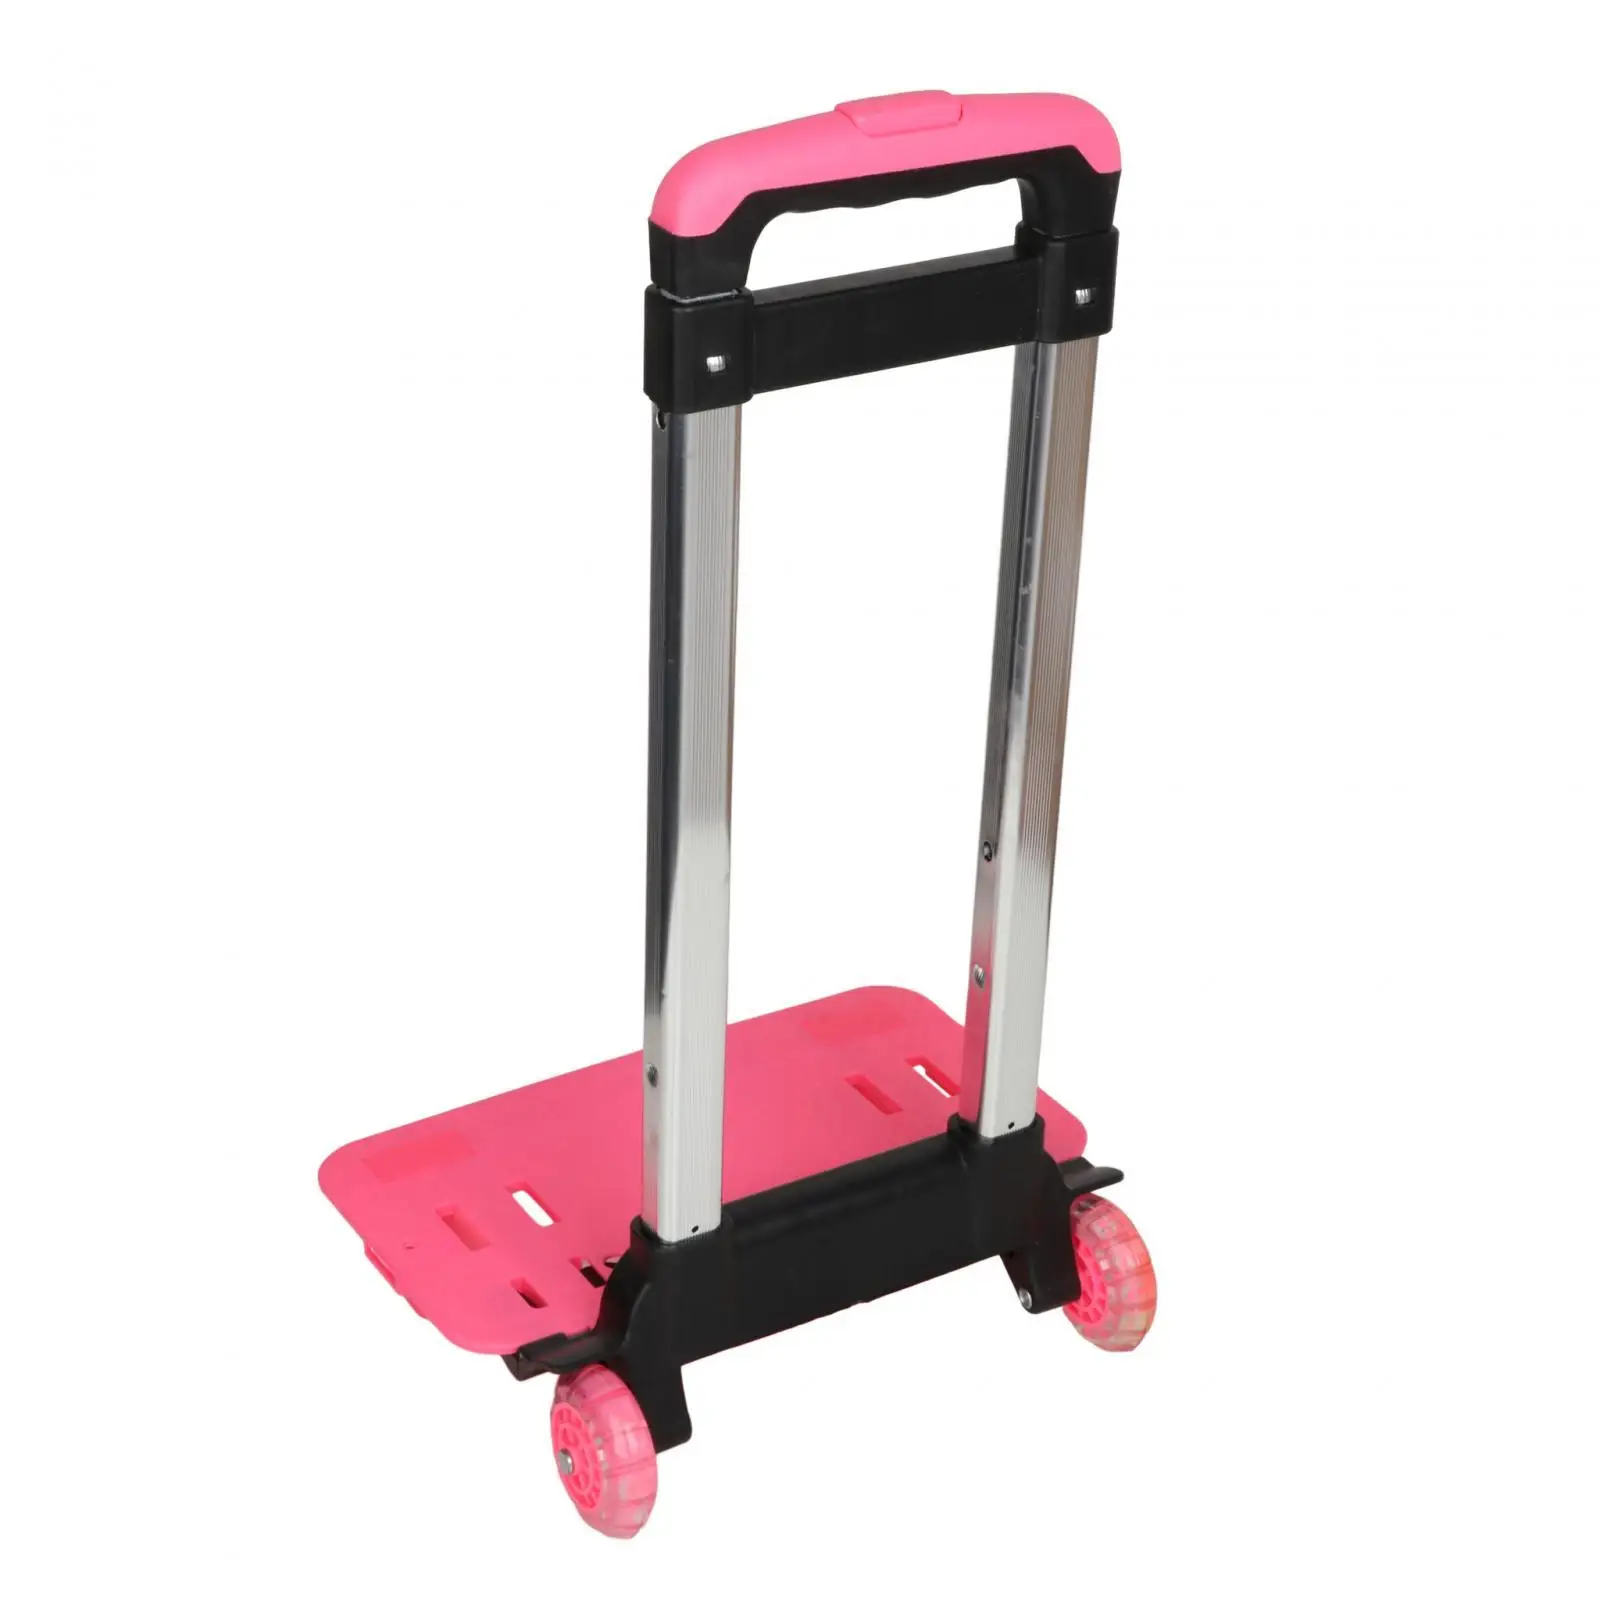 Backpack Hand Truck Pink Compact Telescopic Rod Foldable Portable Backpack Trolley Wheeled Hand Trolley for Kids Children Girl